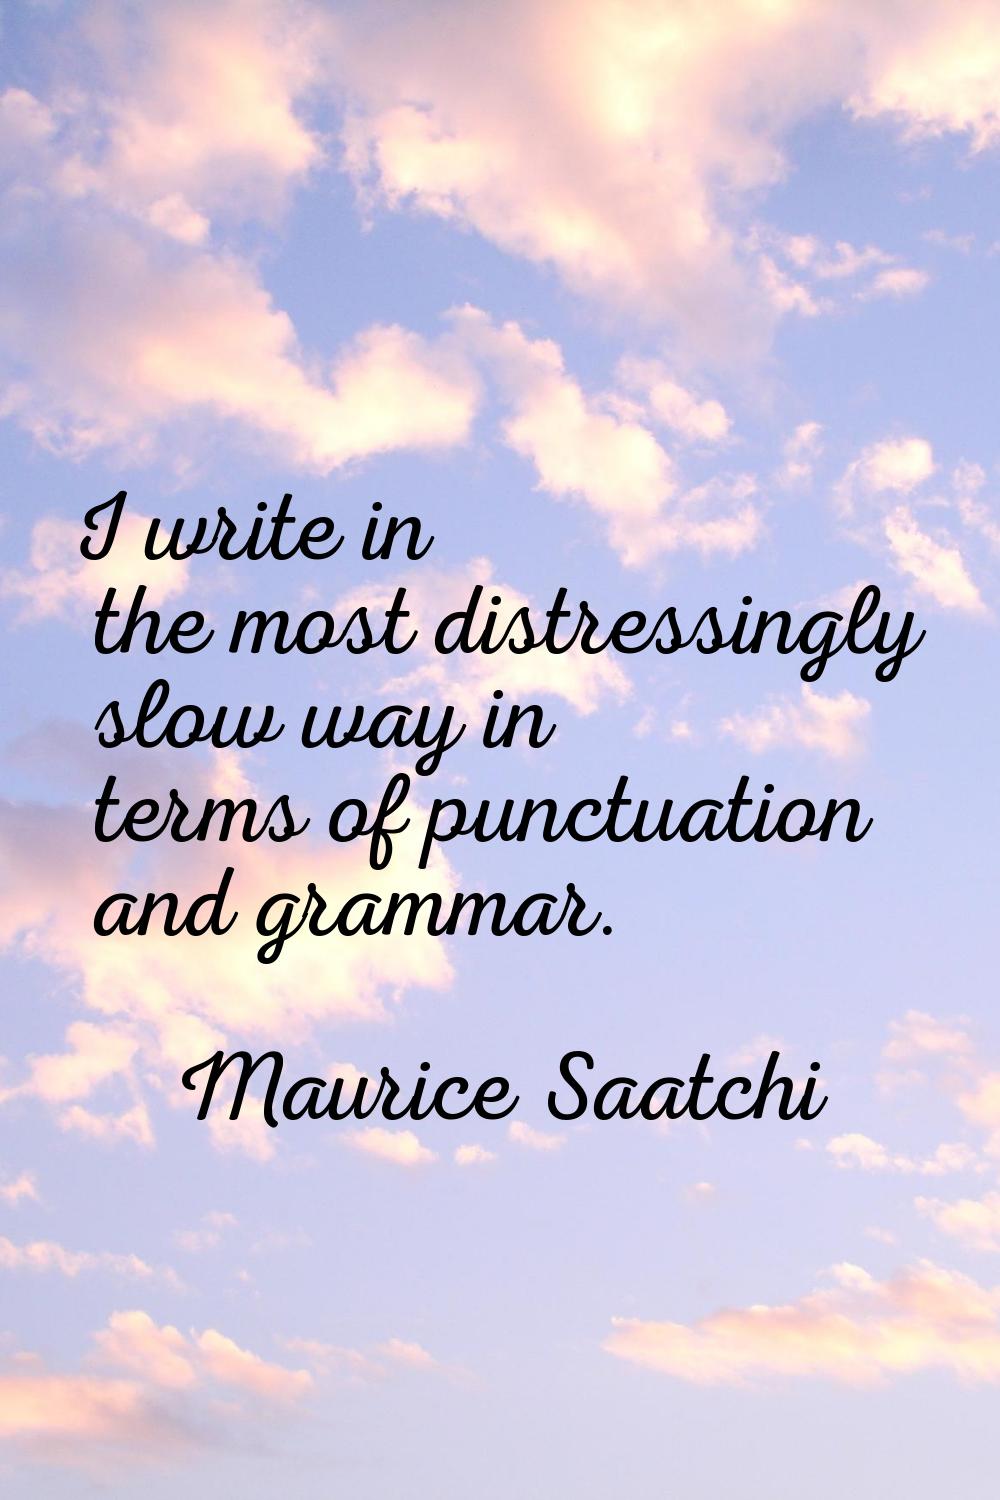 I write in the most distressingly slow way in terms of punctuation and grammar.